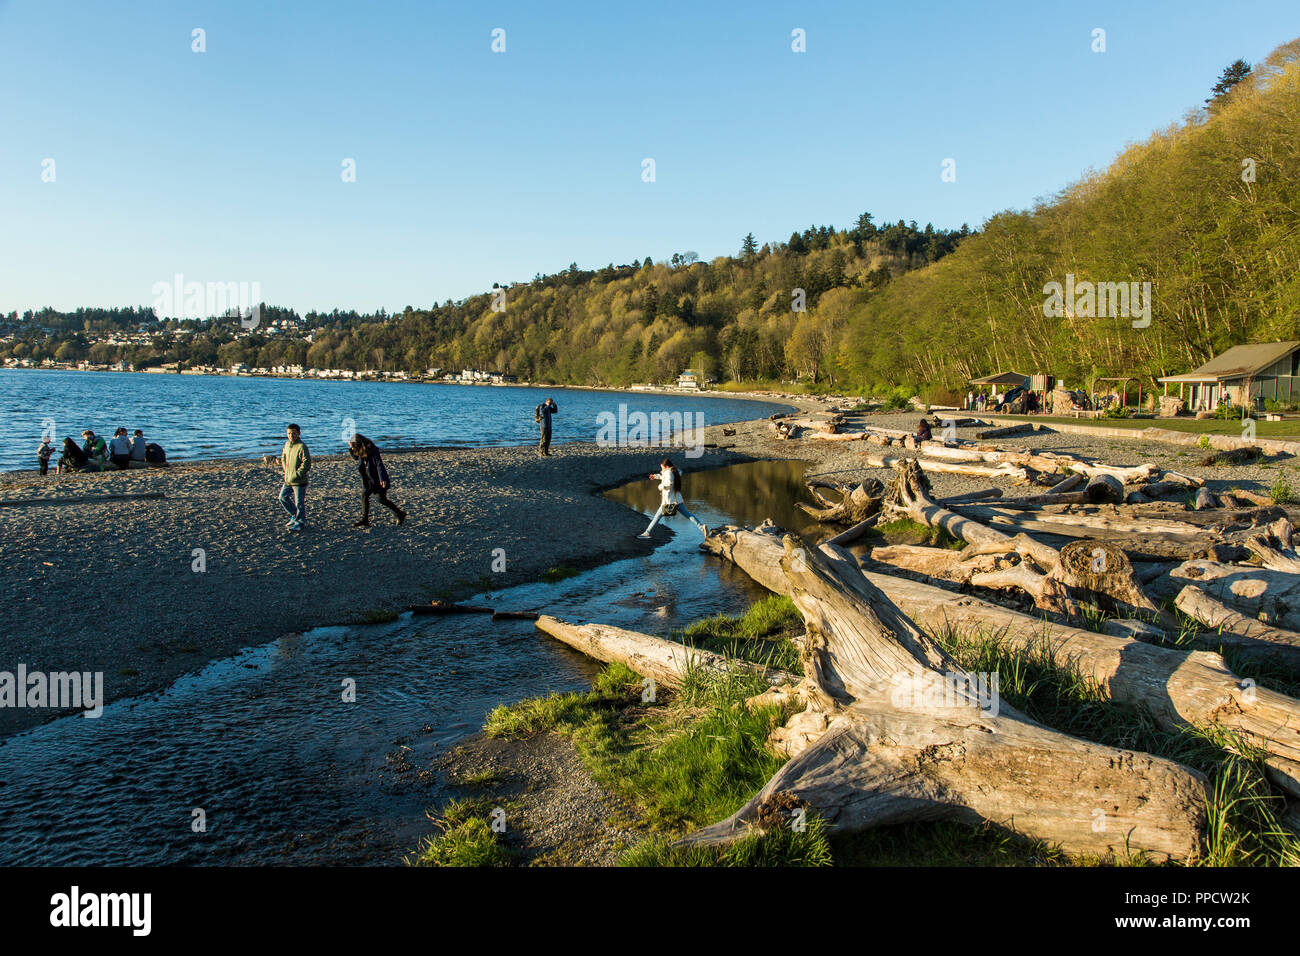 Clear sky over people relaxing on coastal beach filled with driftwood, Seattle, Washington, USA Stock Photo